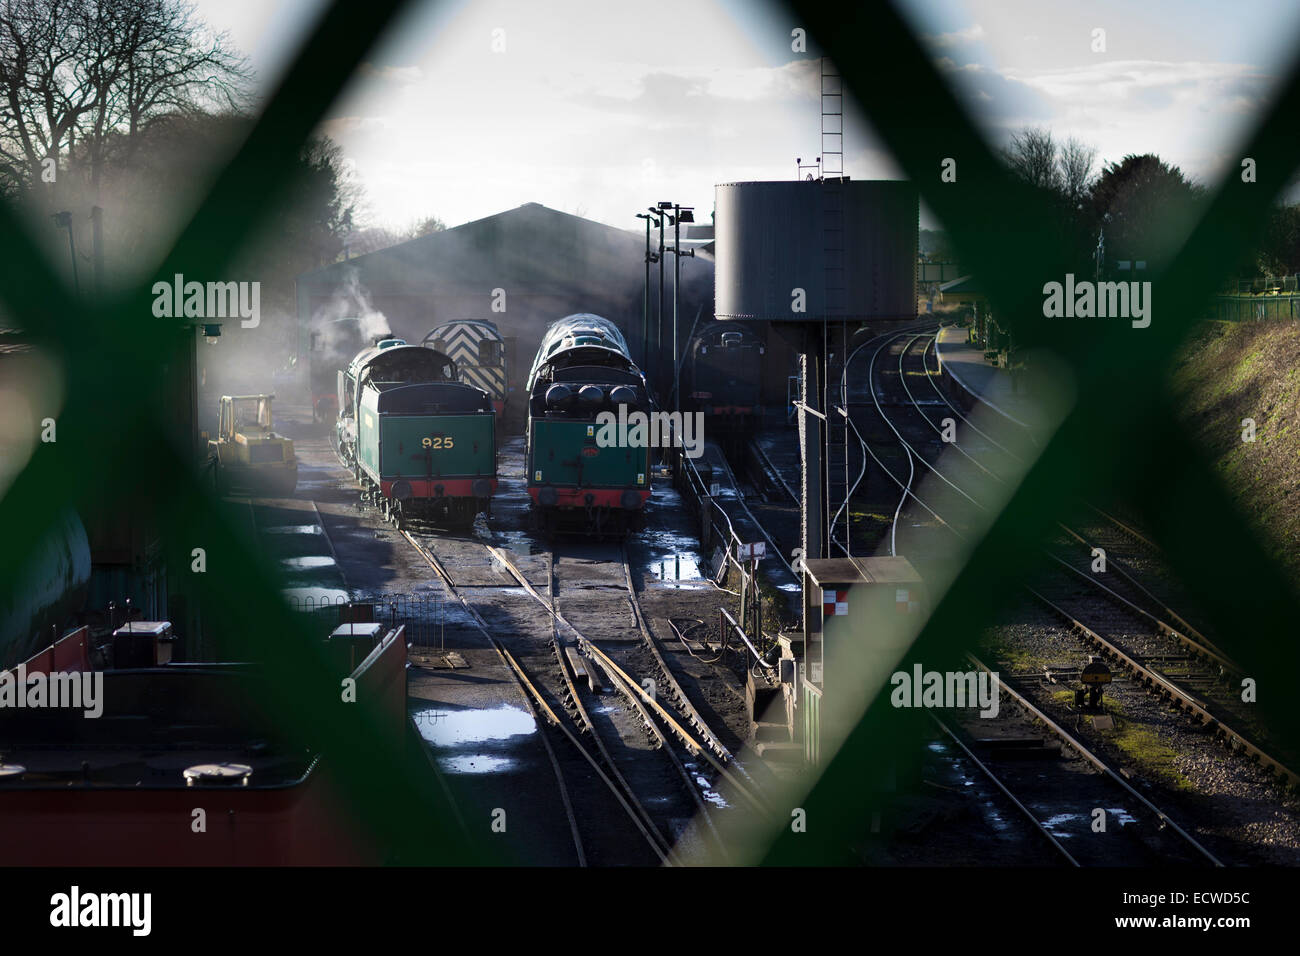 Steam engines at Ropley Station on the Mid-Hants Railway, also known as The Watercress Line. Stock Photo